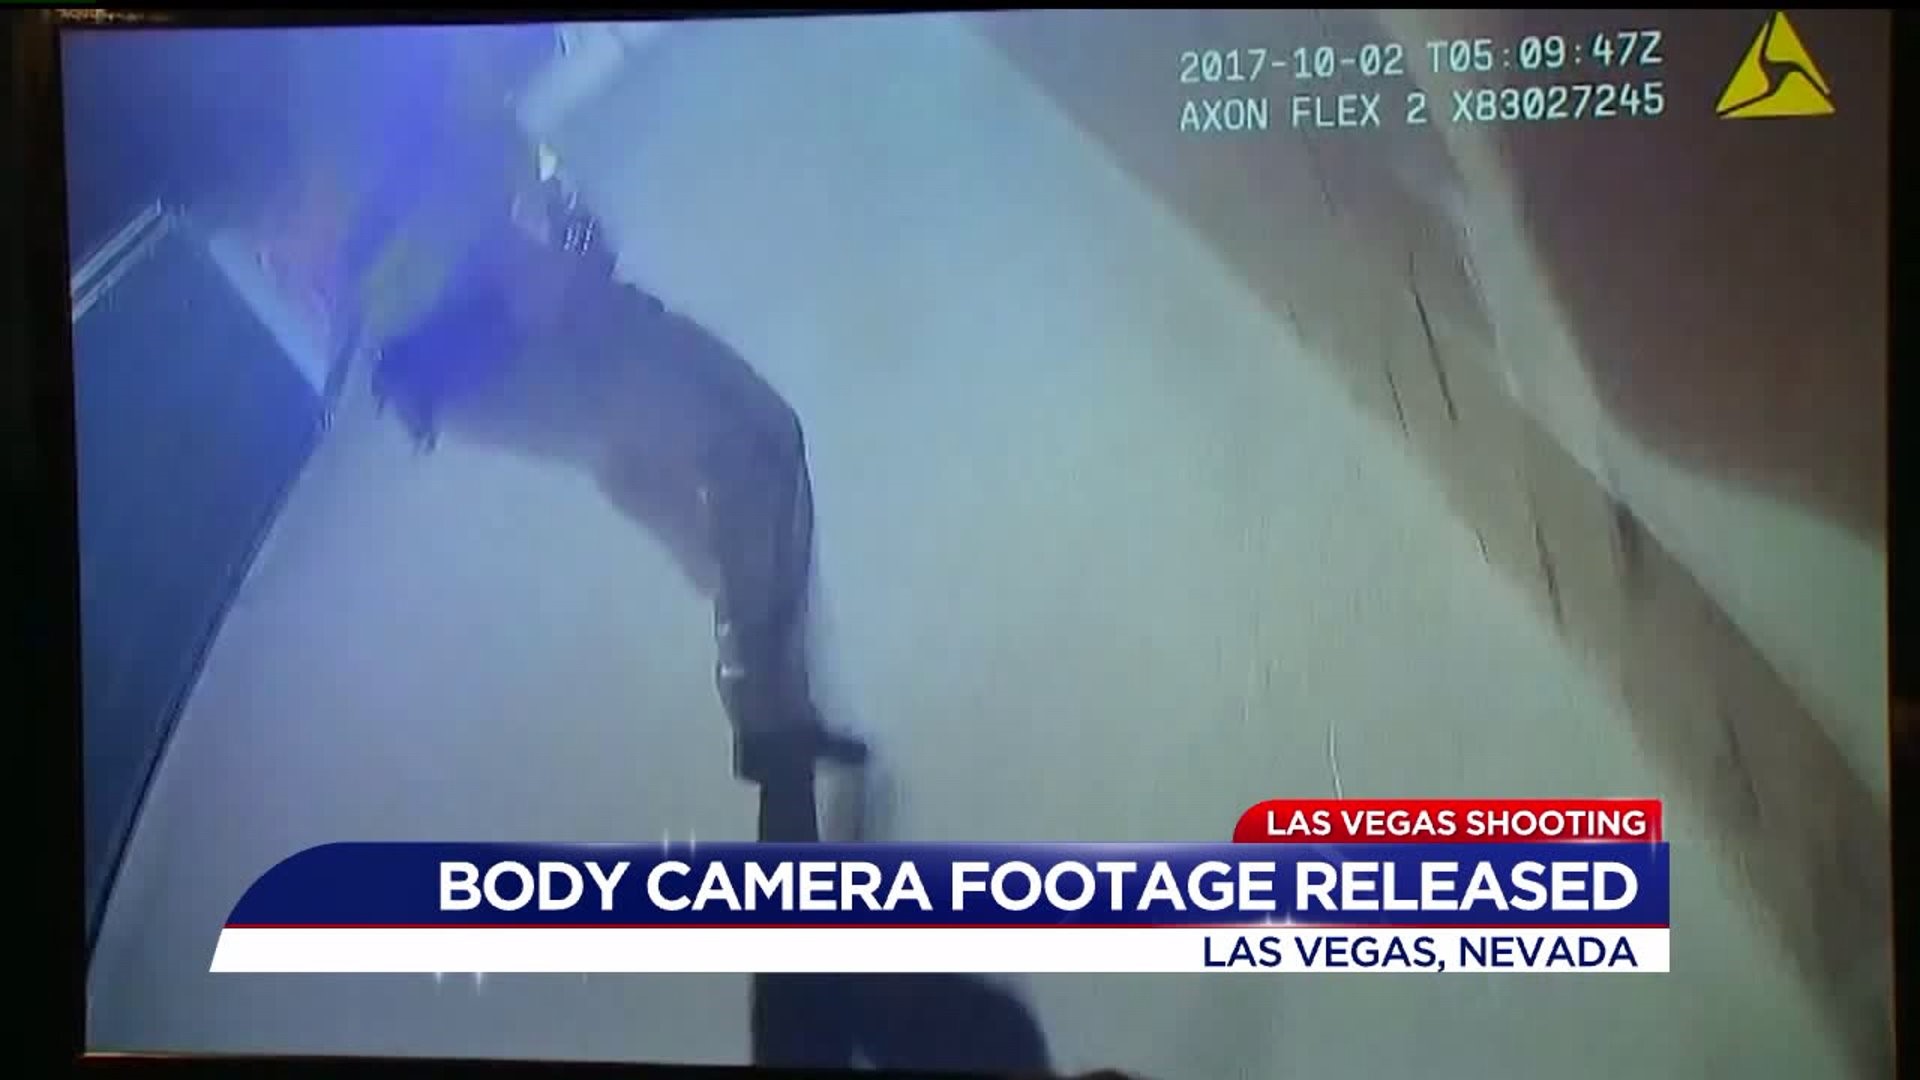 Body camera footage released from Las Vegas shooting